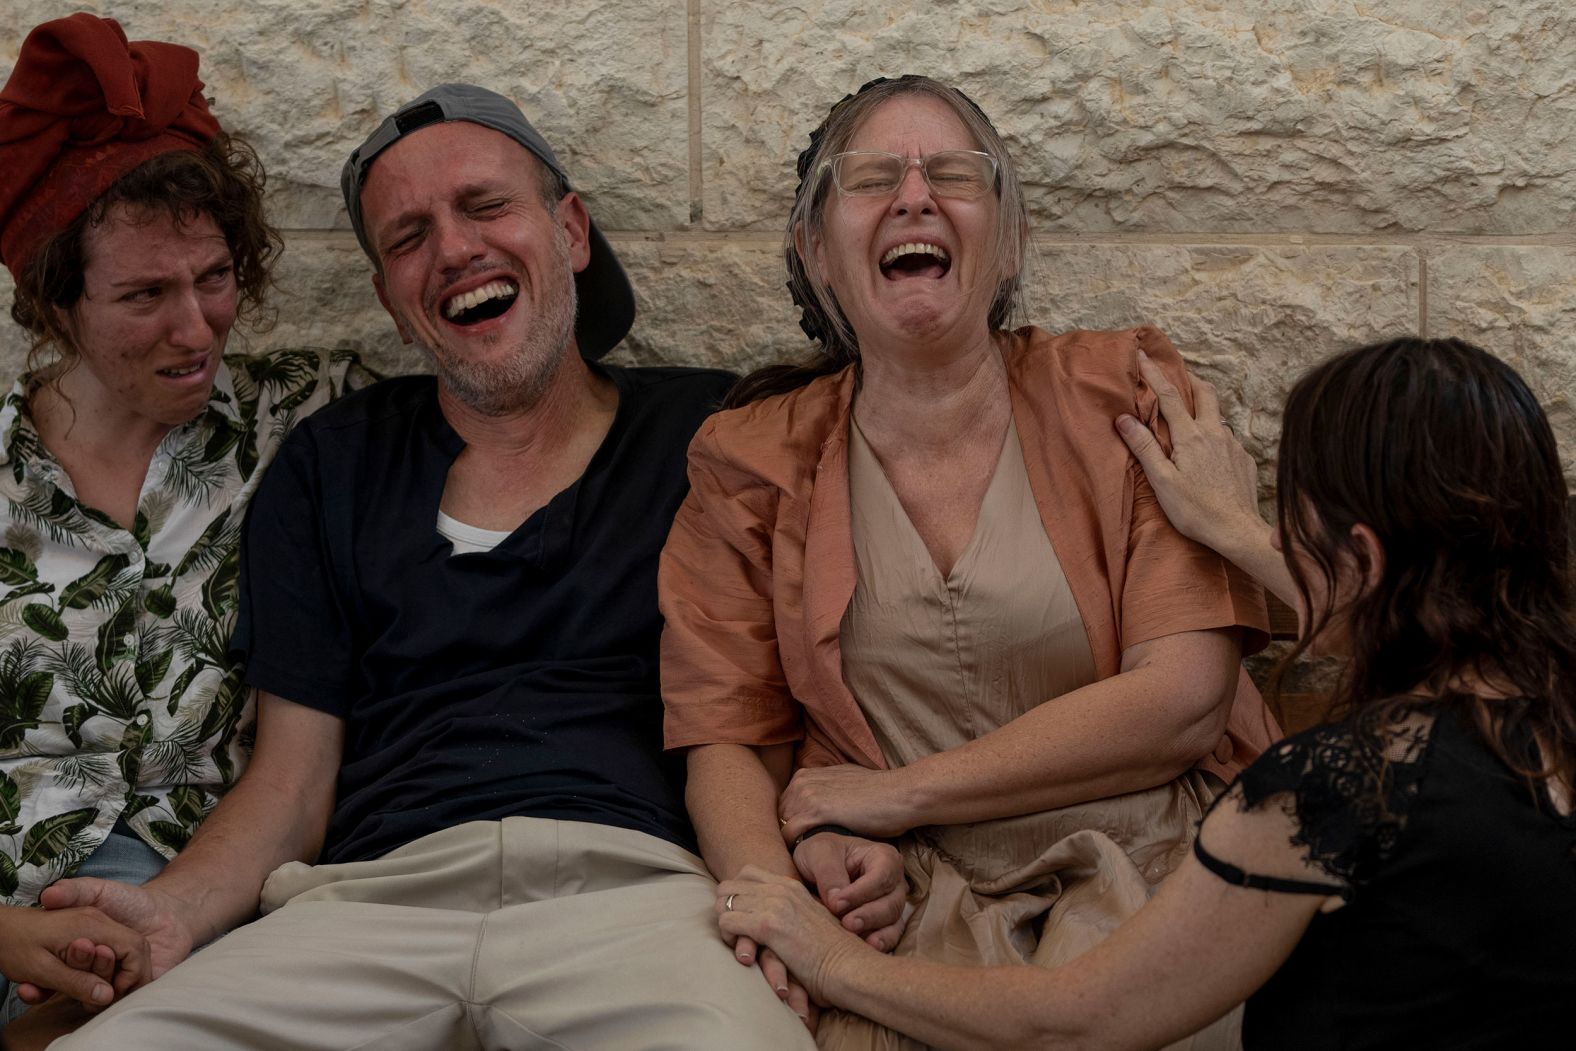 Itzik and Miriam Shafir, center, mourn during their son's funeral at a cemetery in Modiin Maccabim, Israel, on October 11. Their son, Dor Shafir, and his girlfriend, Savion Kiper, were killed during <a href="index.php?page=&url=https%3A%2F%2Fwww.cnn.com%2F2023%2F10%2F07%2Fmiddleeast%2Fisrael-gaza-fighting-hamas-attack-music-festival-intl-hnk%2Findex.html" target="_blank">Hamas' attack on a music festival</a> on Saturday.